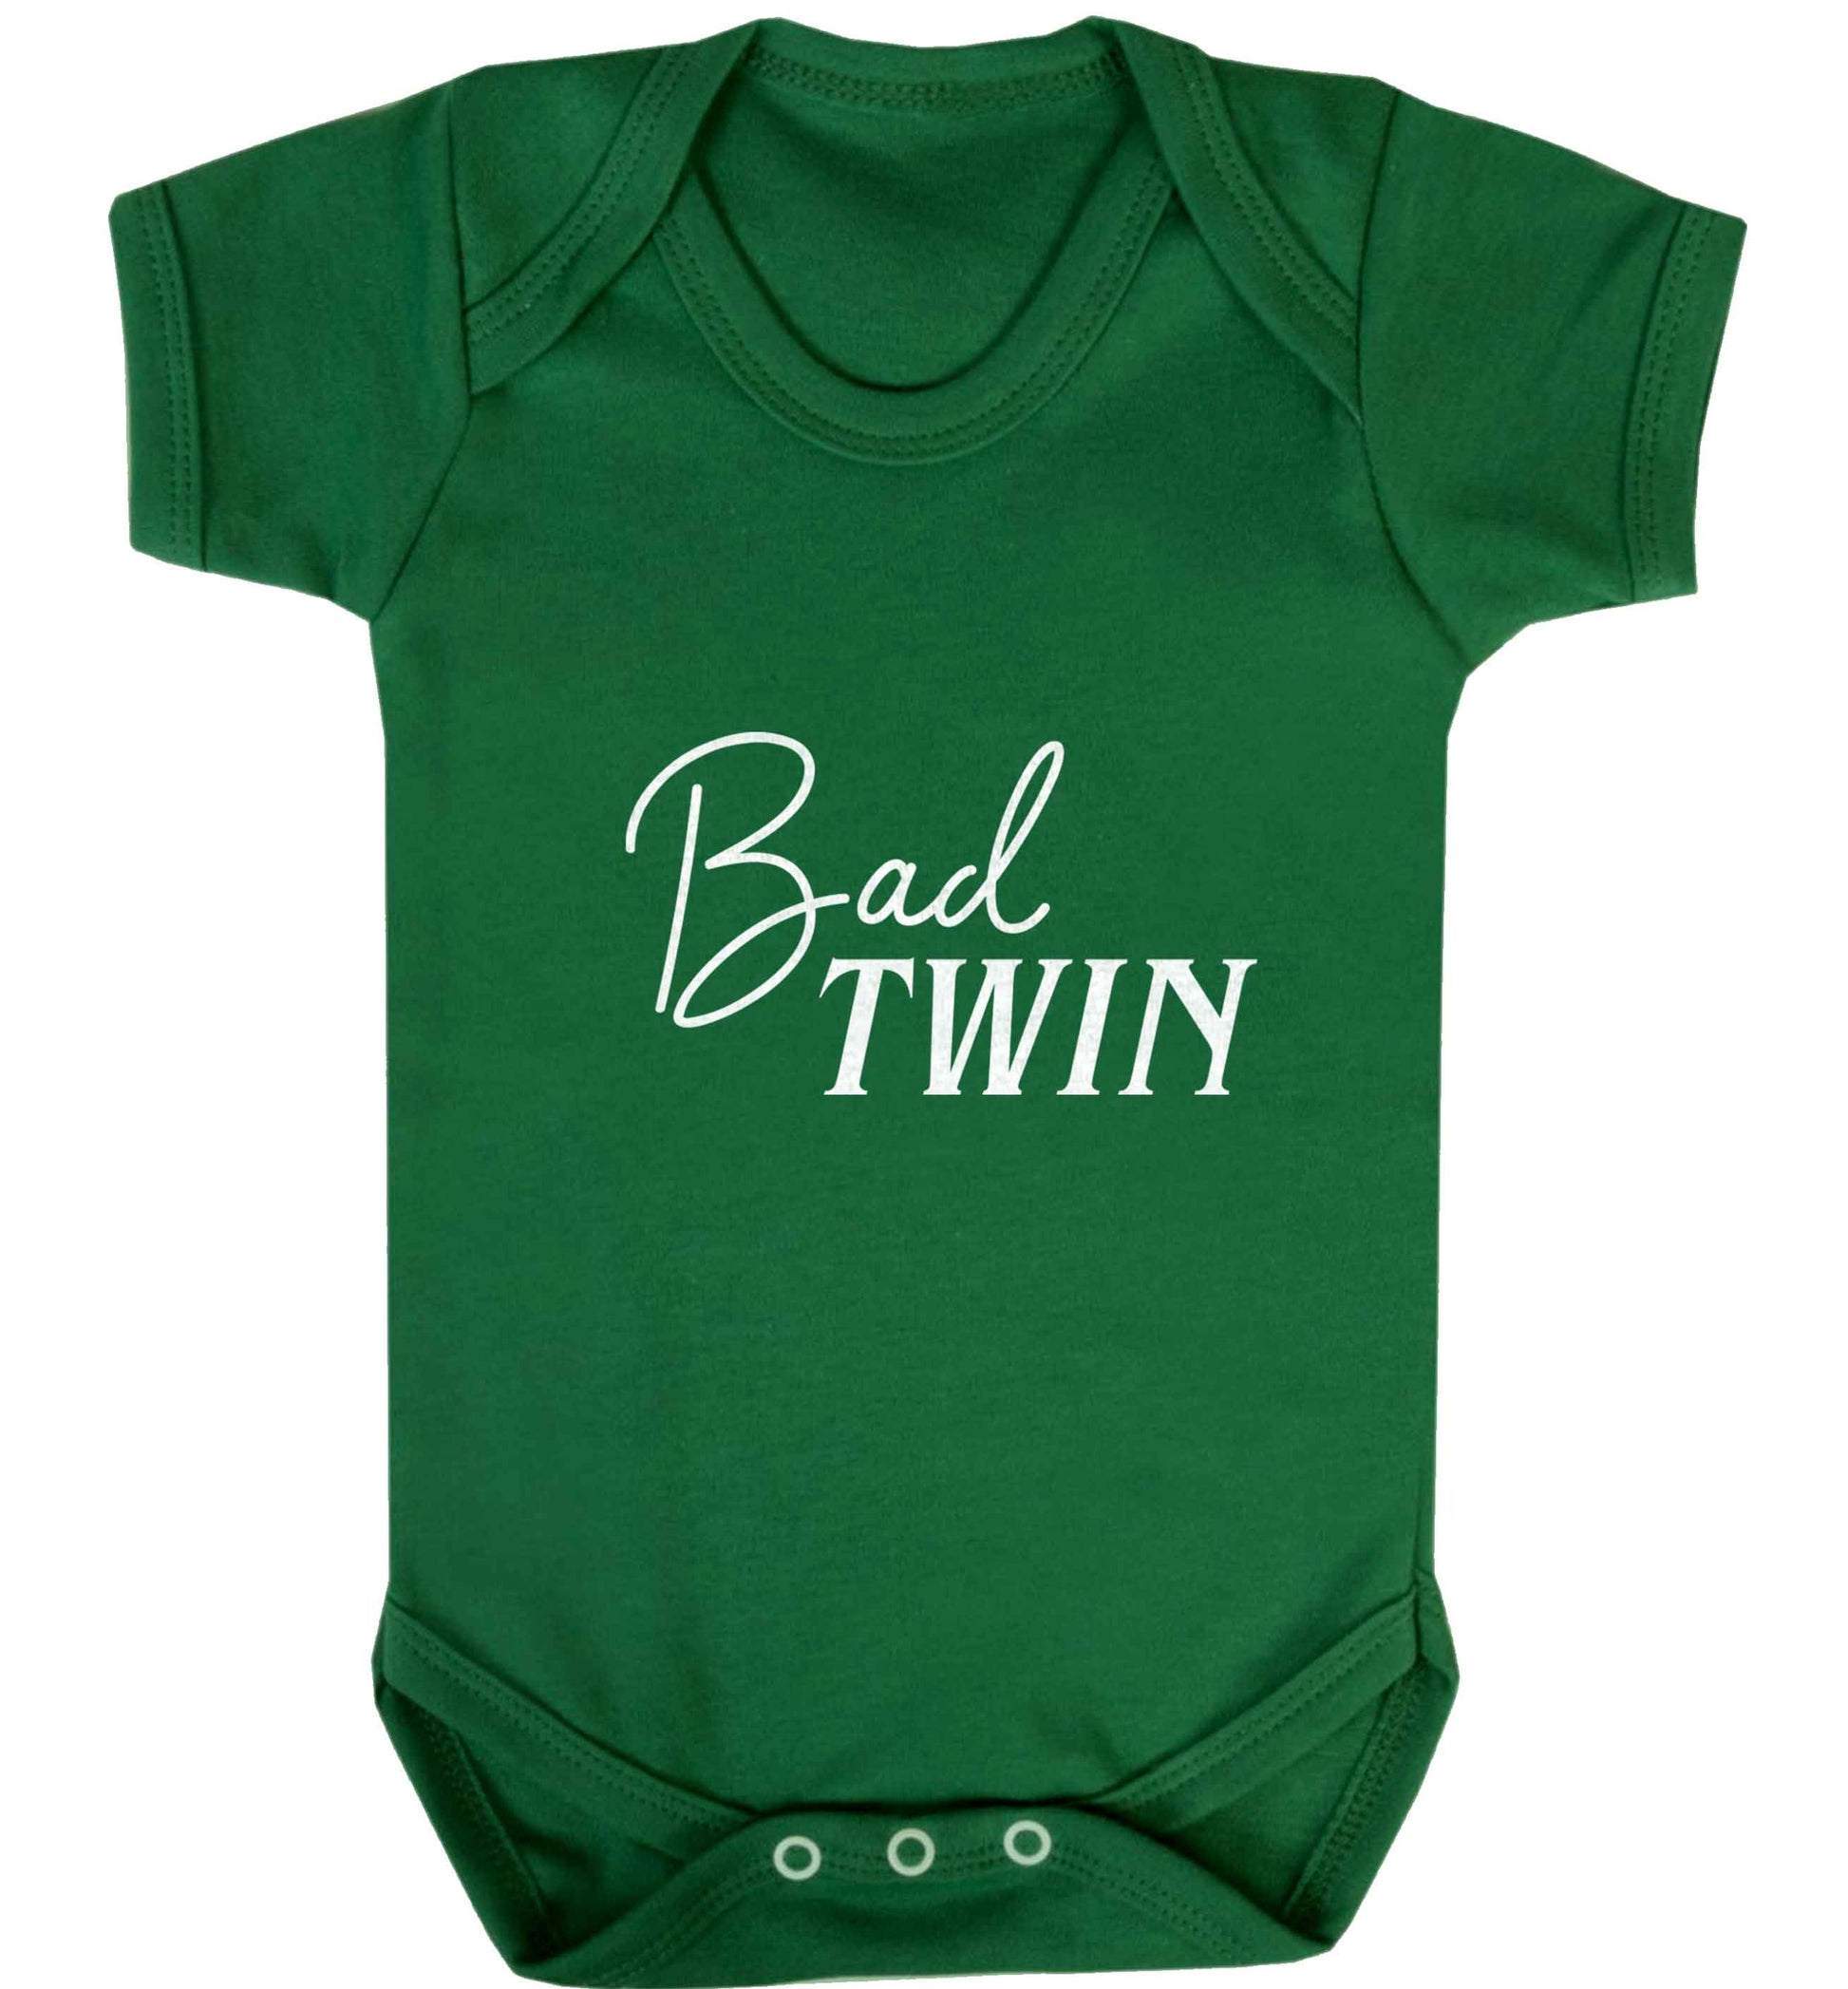 Bad twin baby vest green 18-24 months